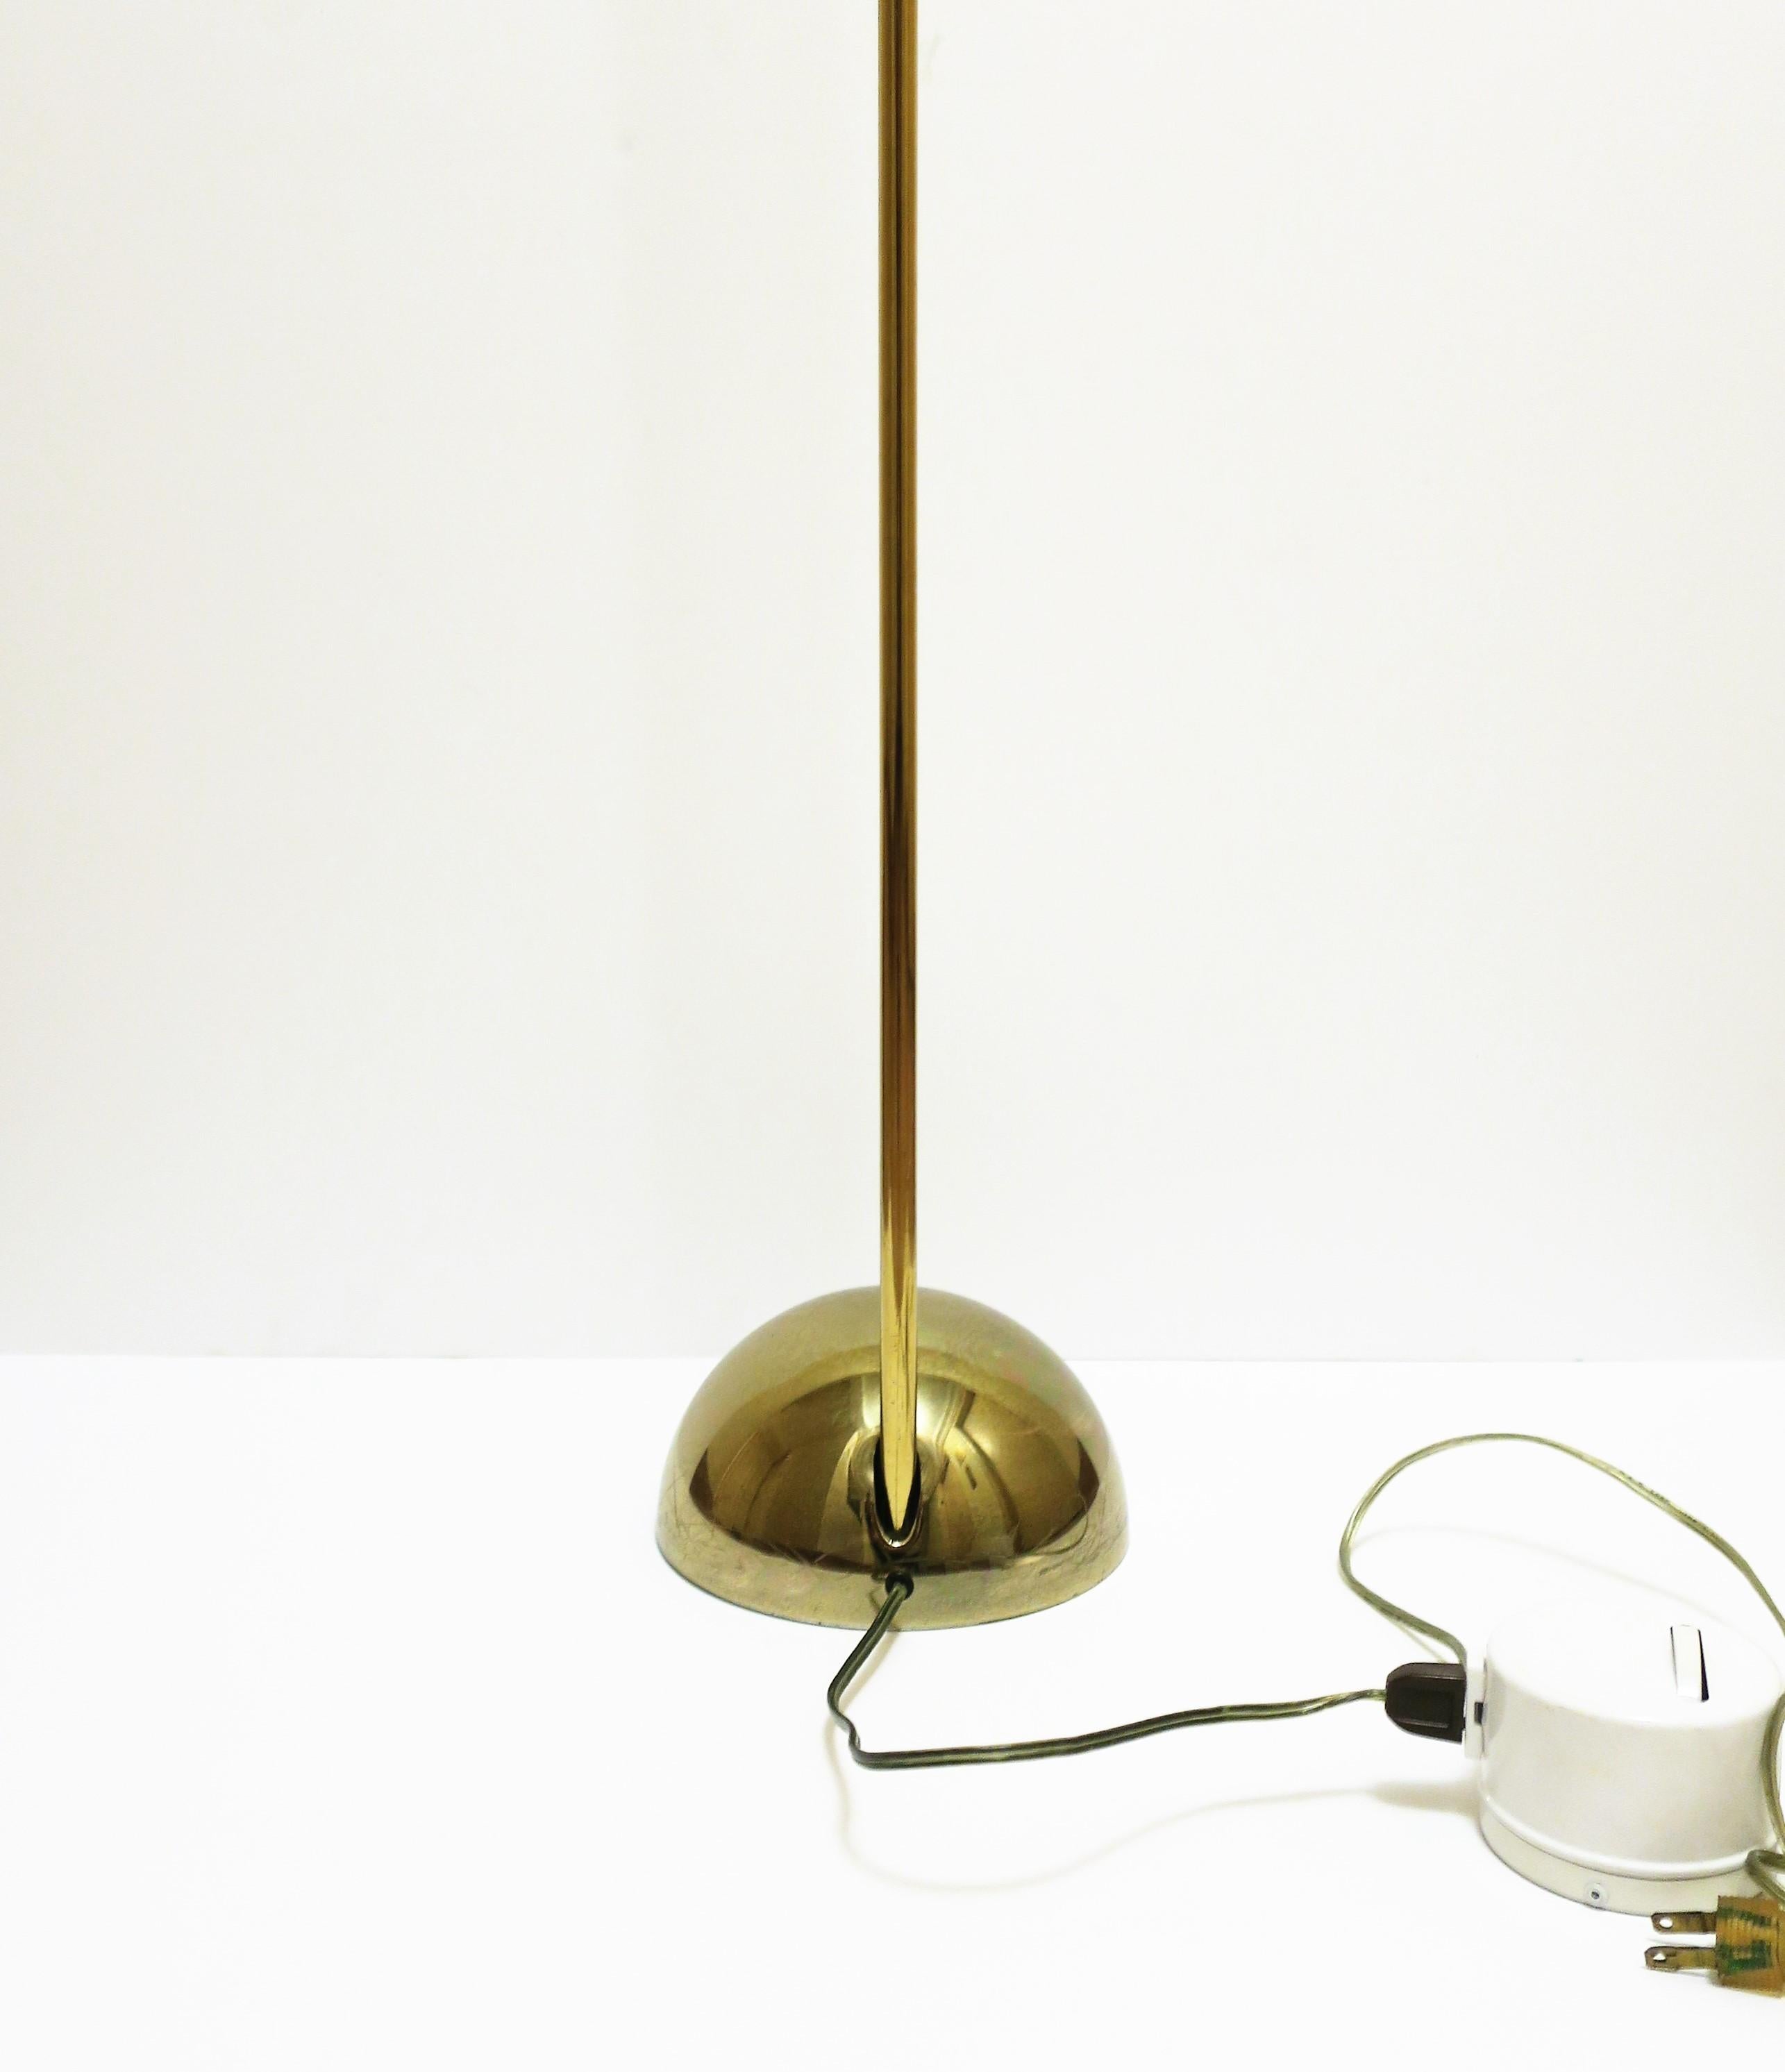 Modern Brass Plated Floor Lamp, circa 1970s For Sale 4